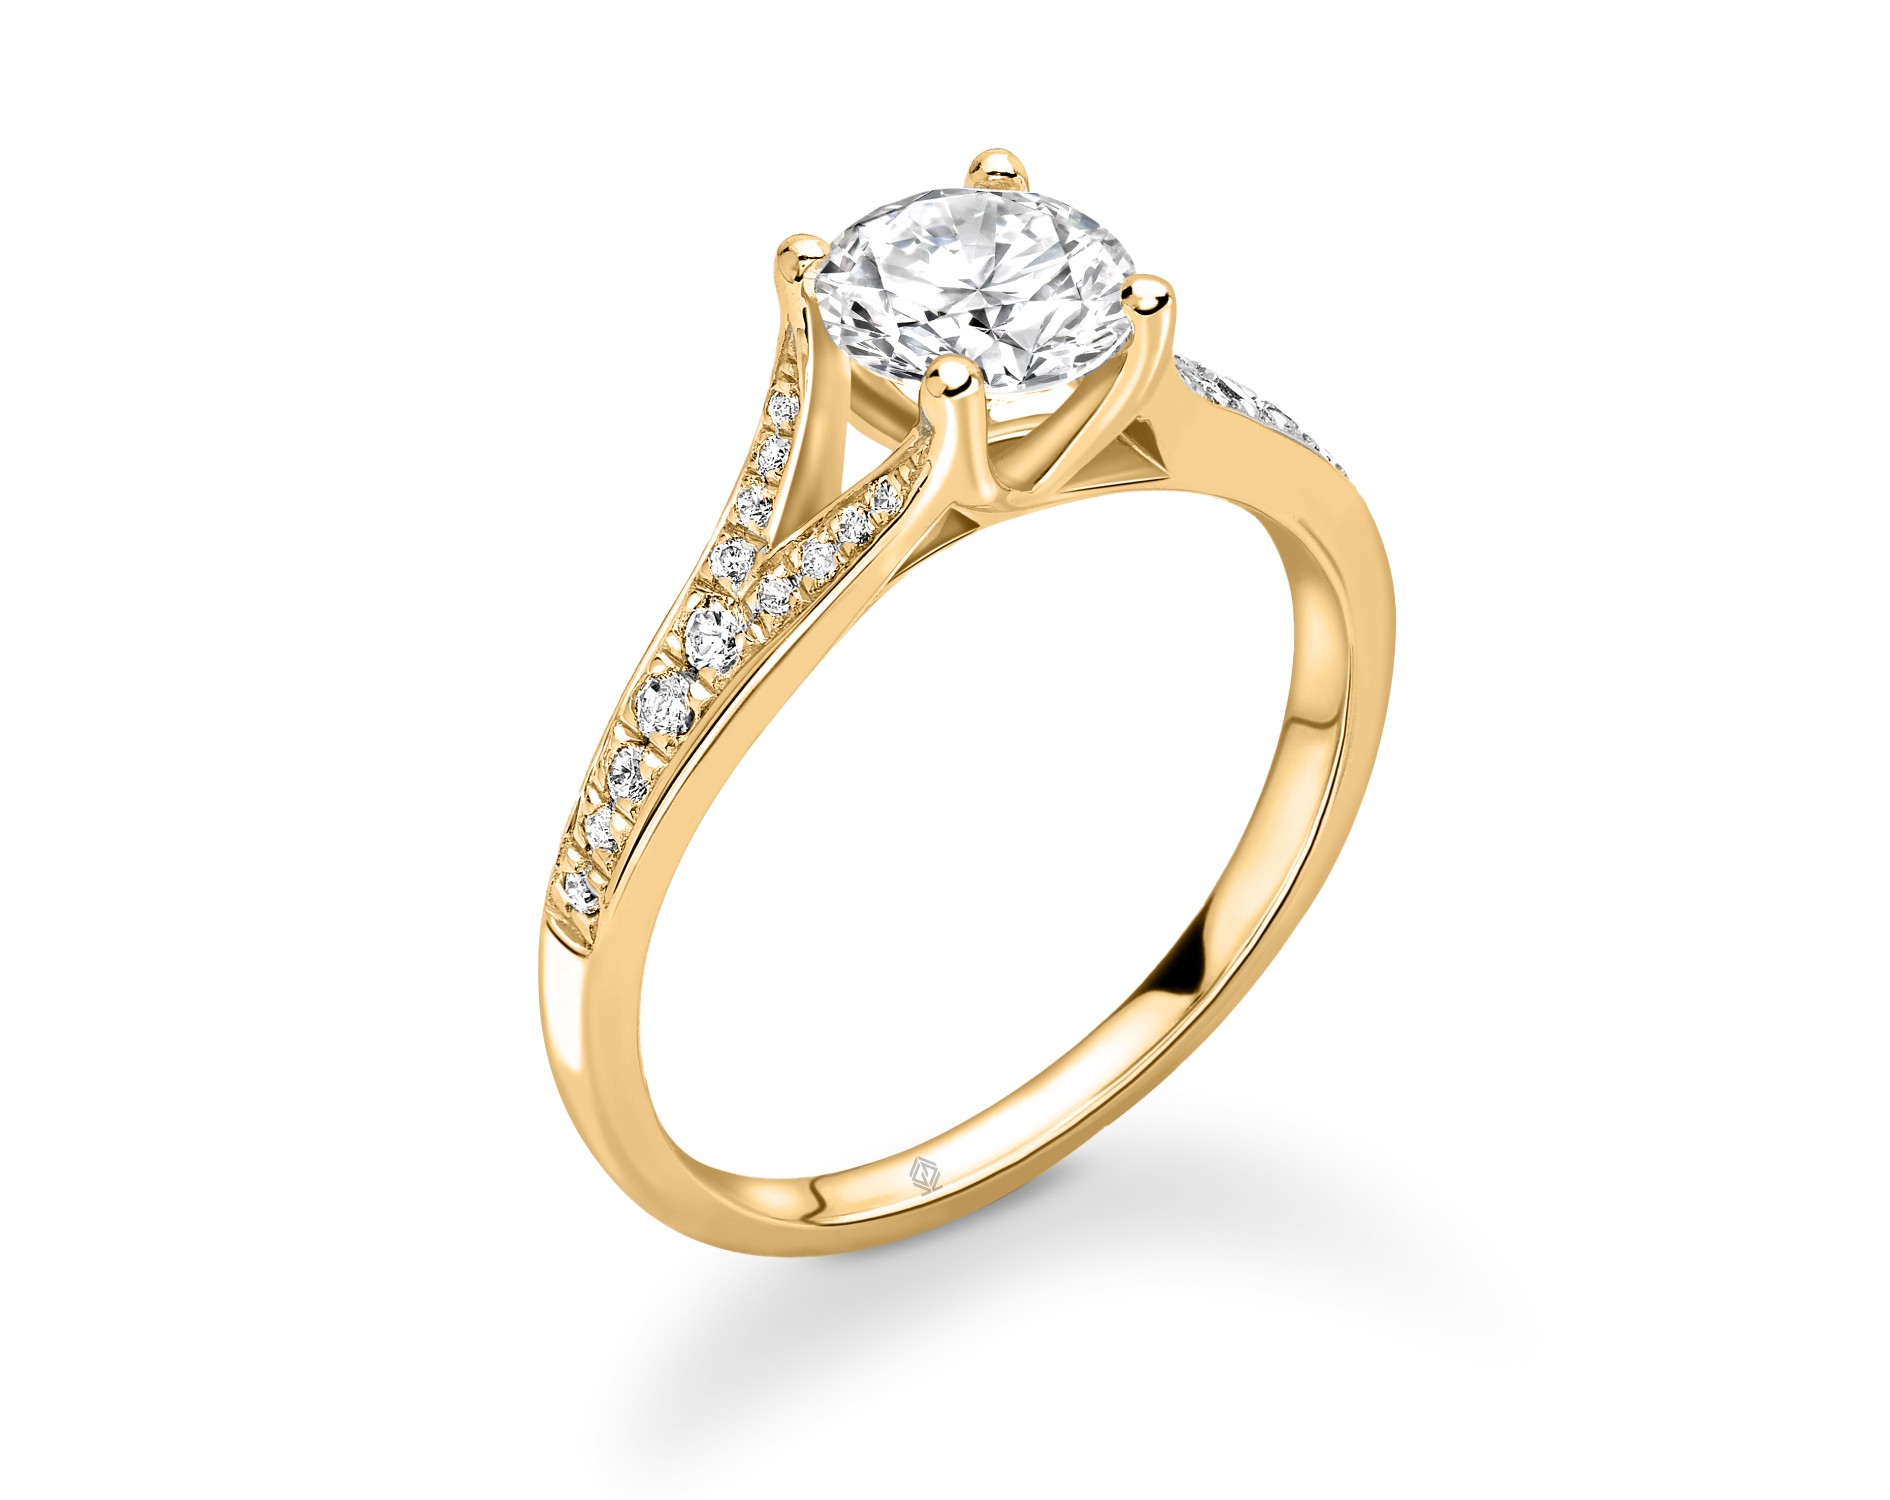 18K YELLOW GOLD ROUND CUT 4 PRONGS DIAMOND ENGAGEMENT RING WITH SPLIT SHANK AND SIDE STONES